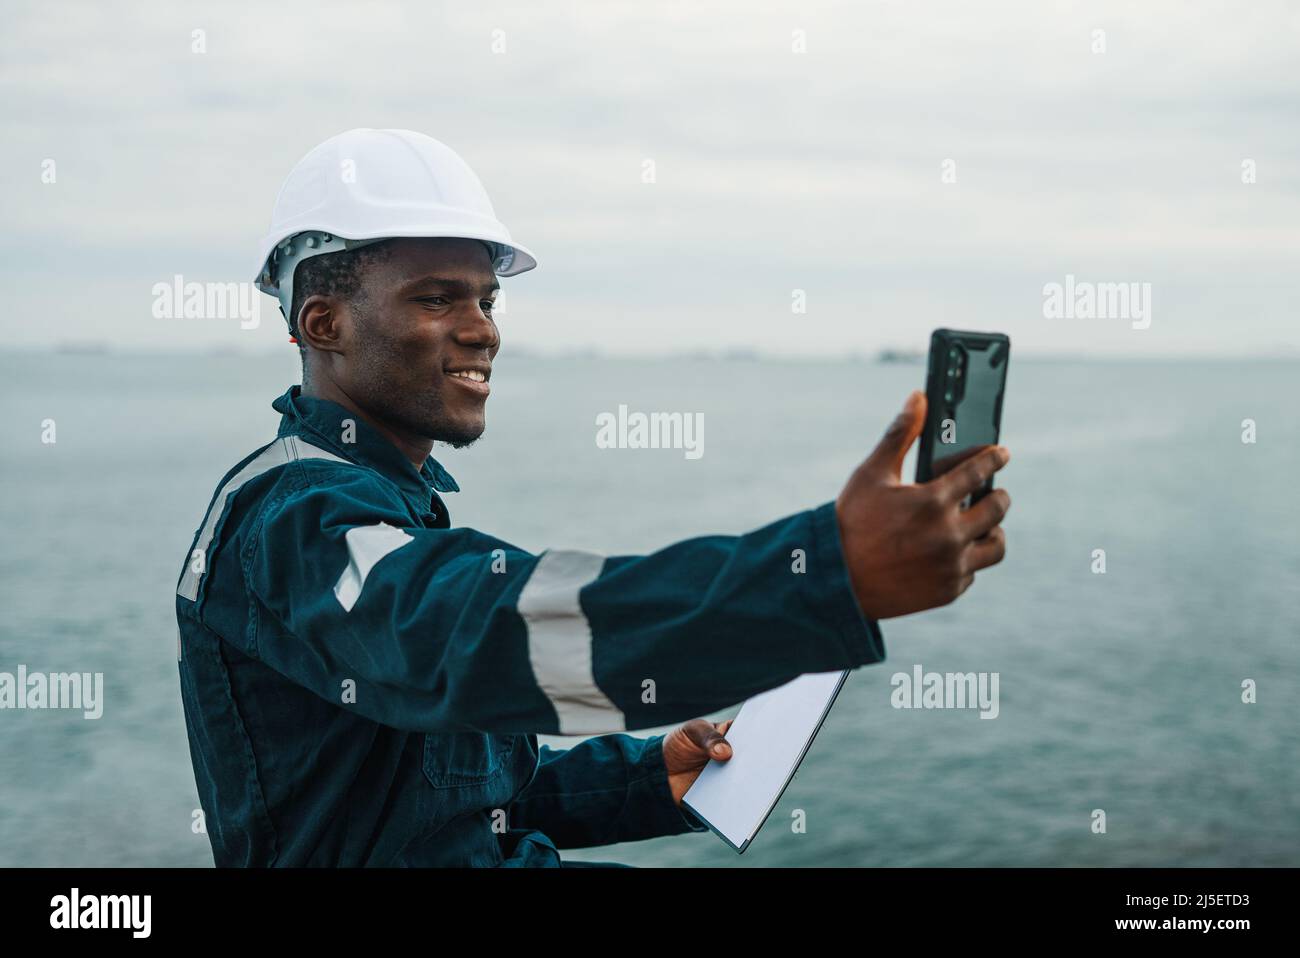 Bosun or seaman officer is taking selfie on the mobile cell phone Stock Photo